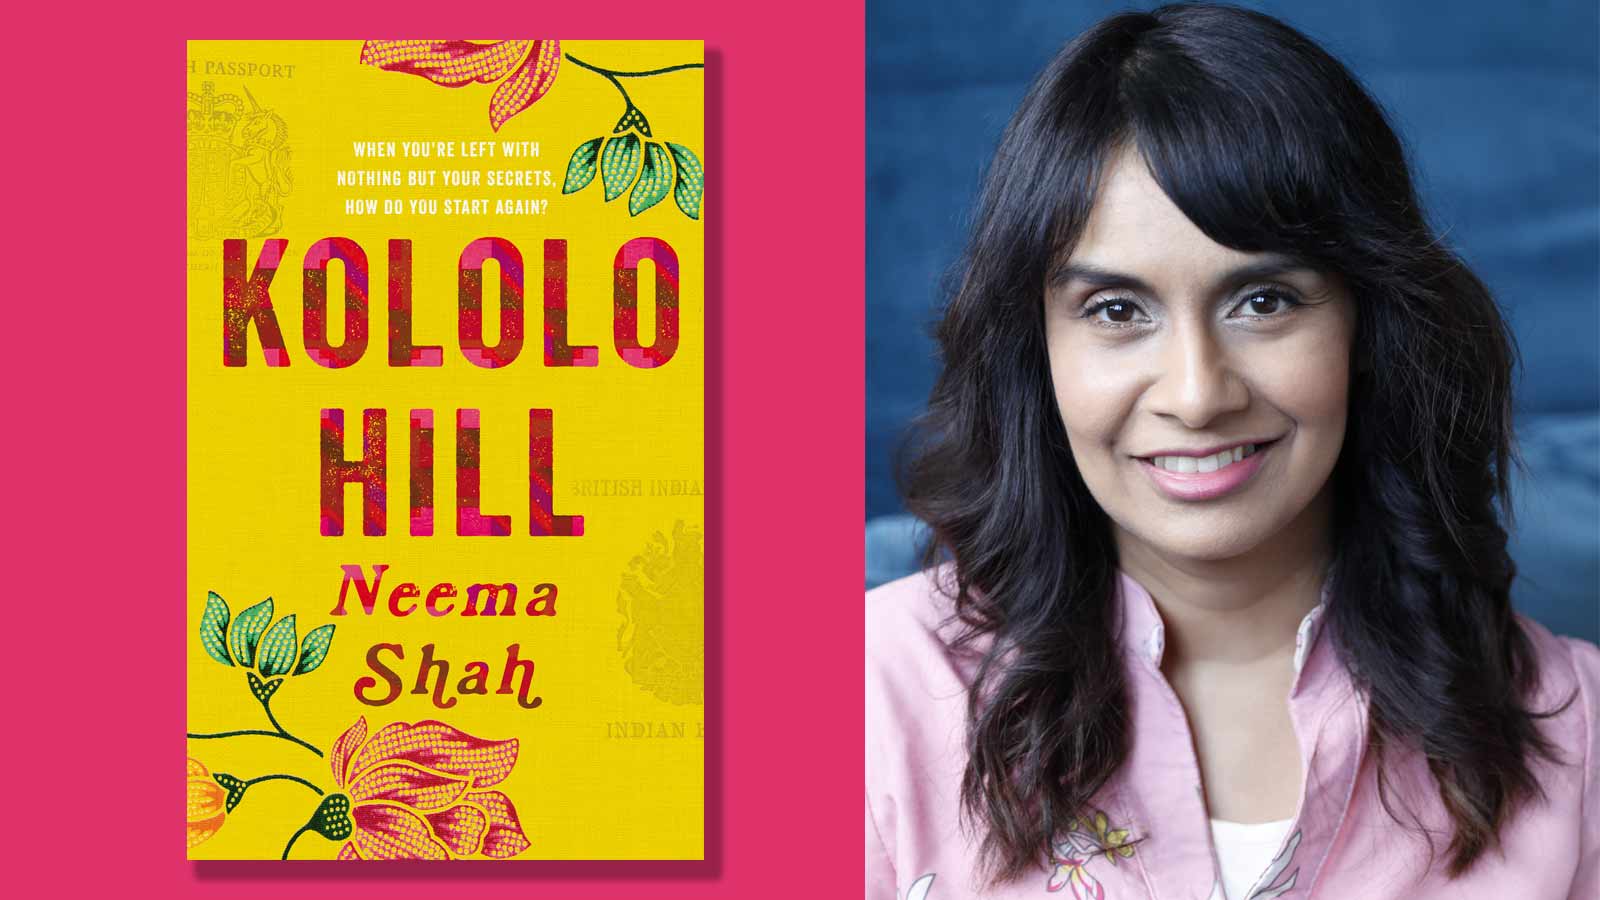 Kololo Hill book cover and photo of Neema Shah